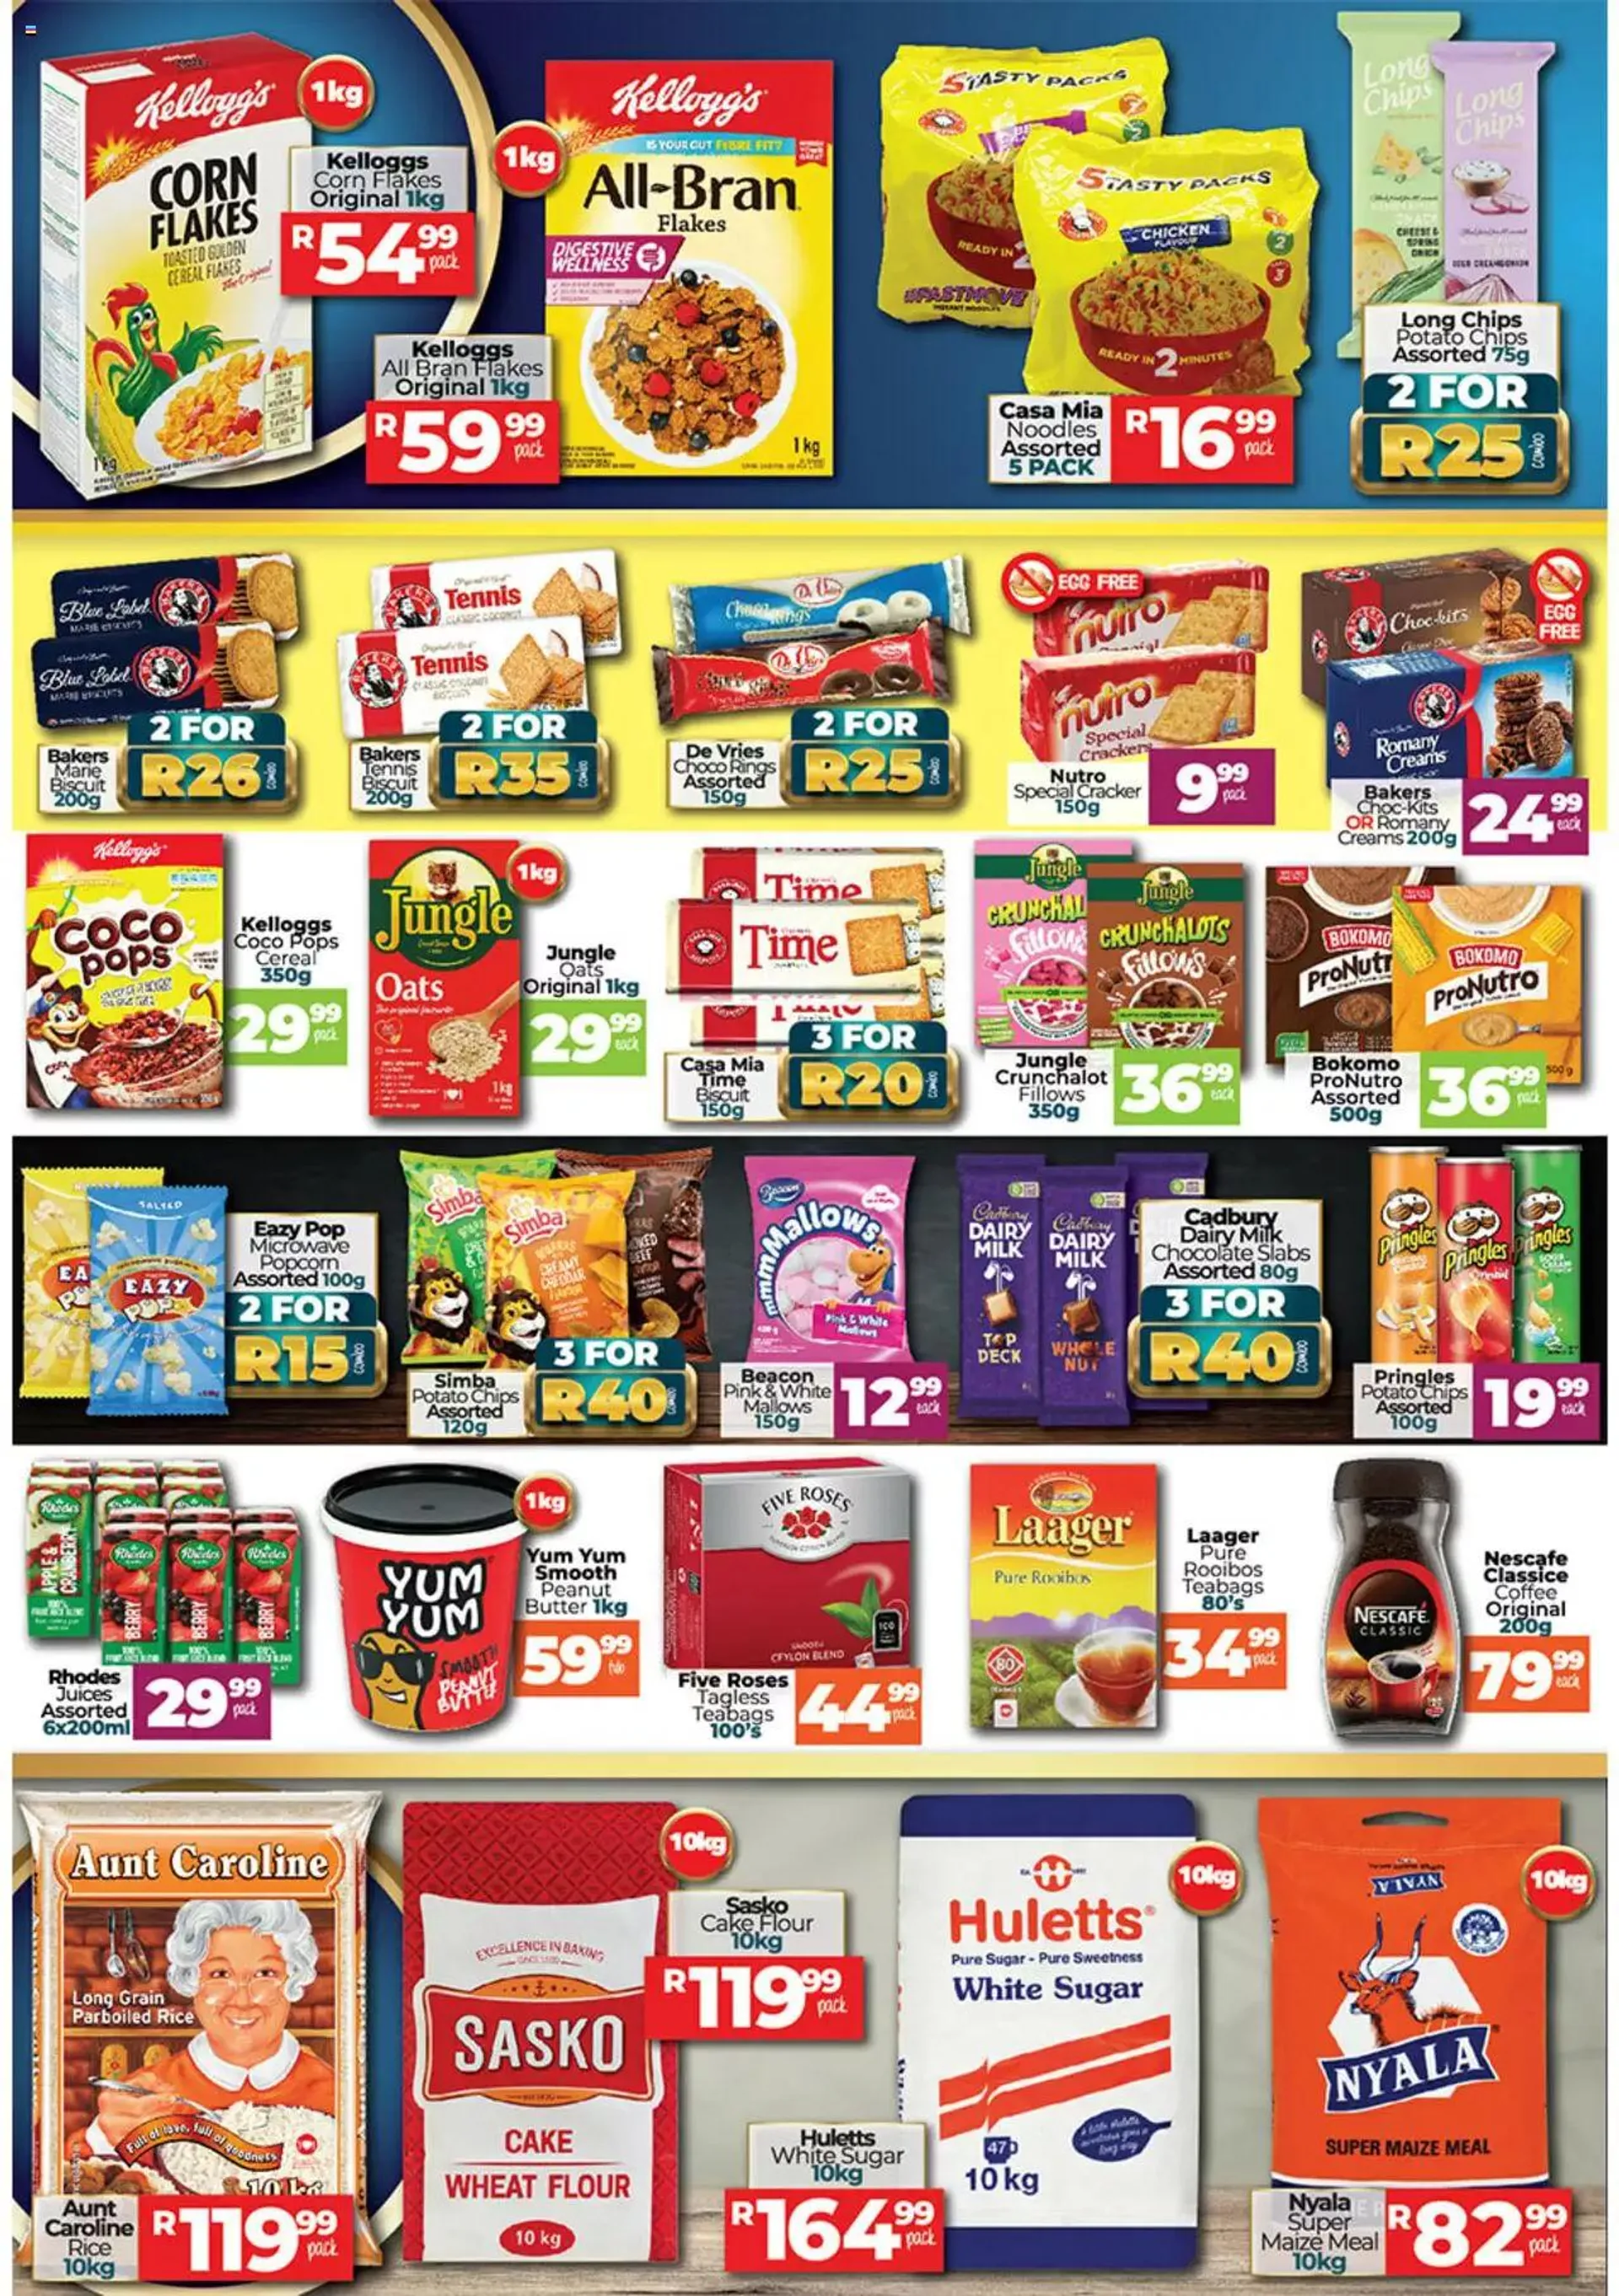 Take n Pay - Specials - 1